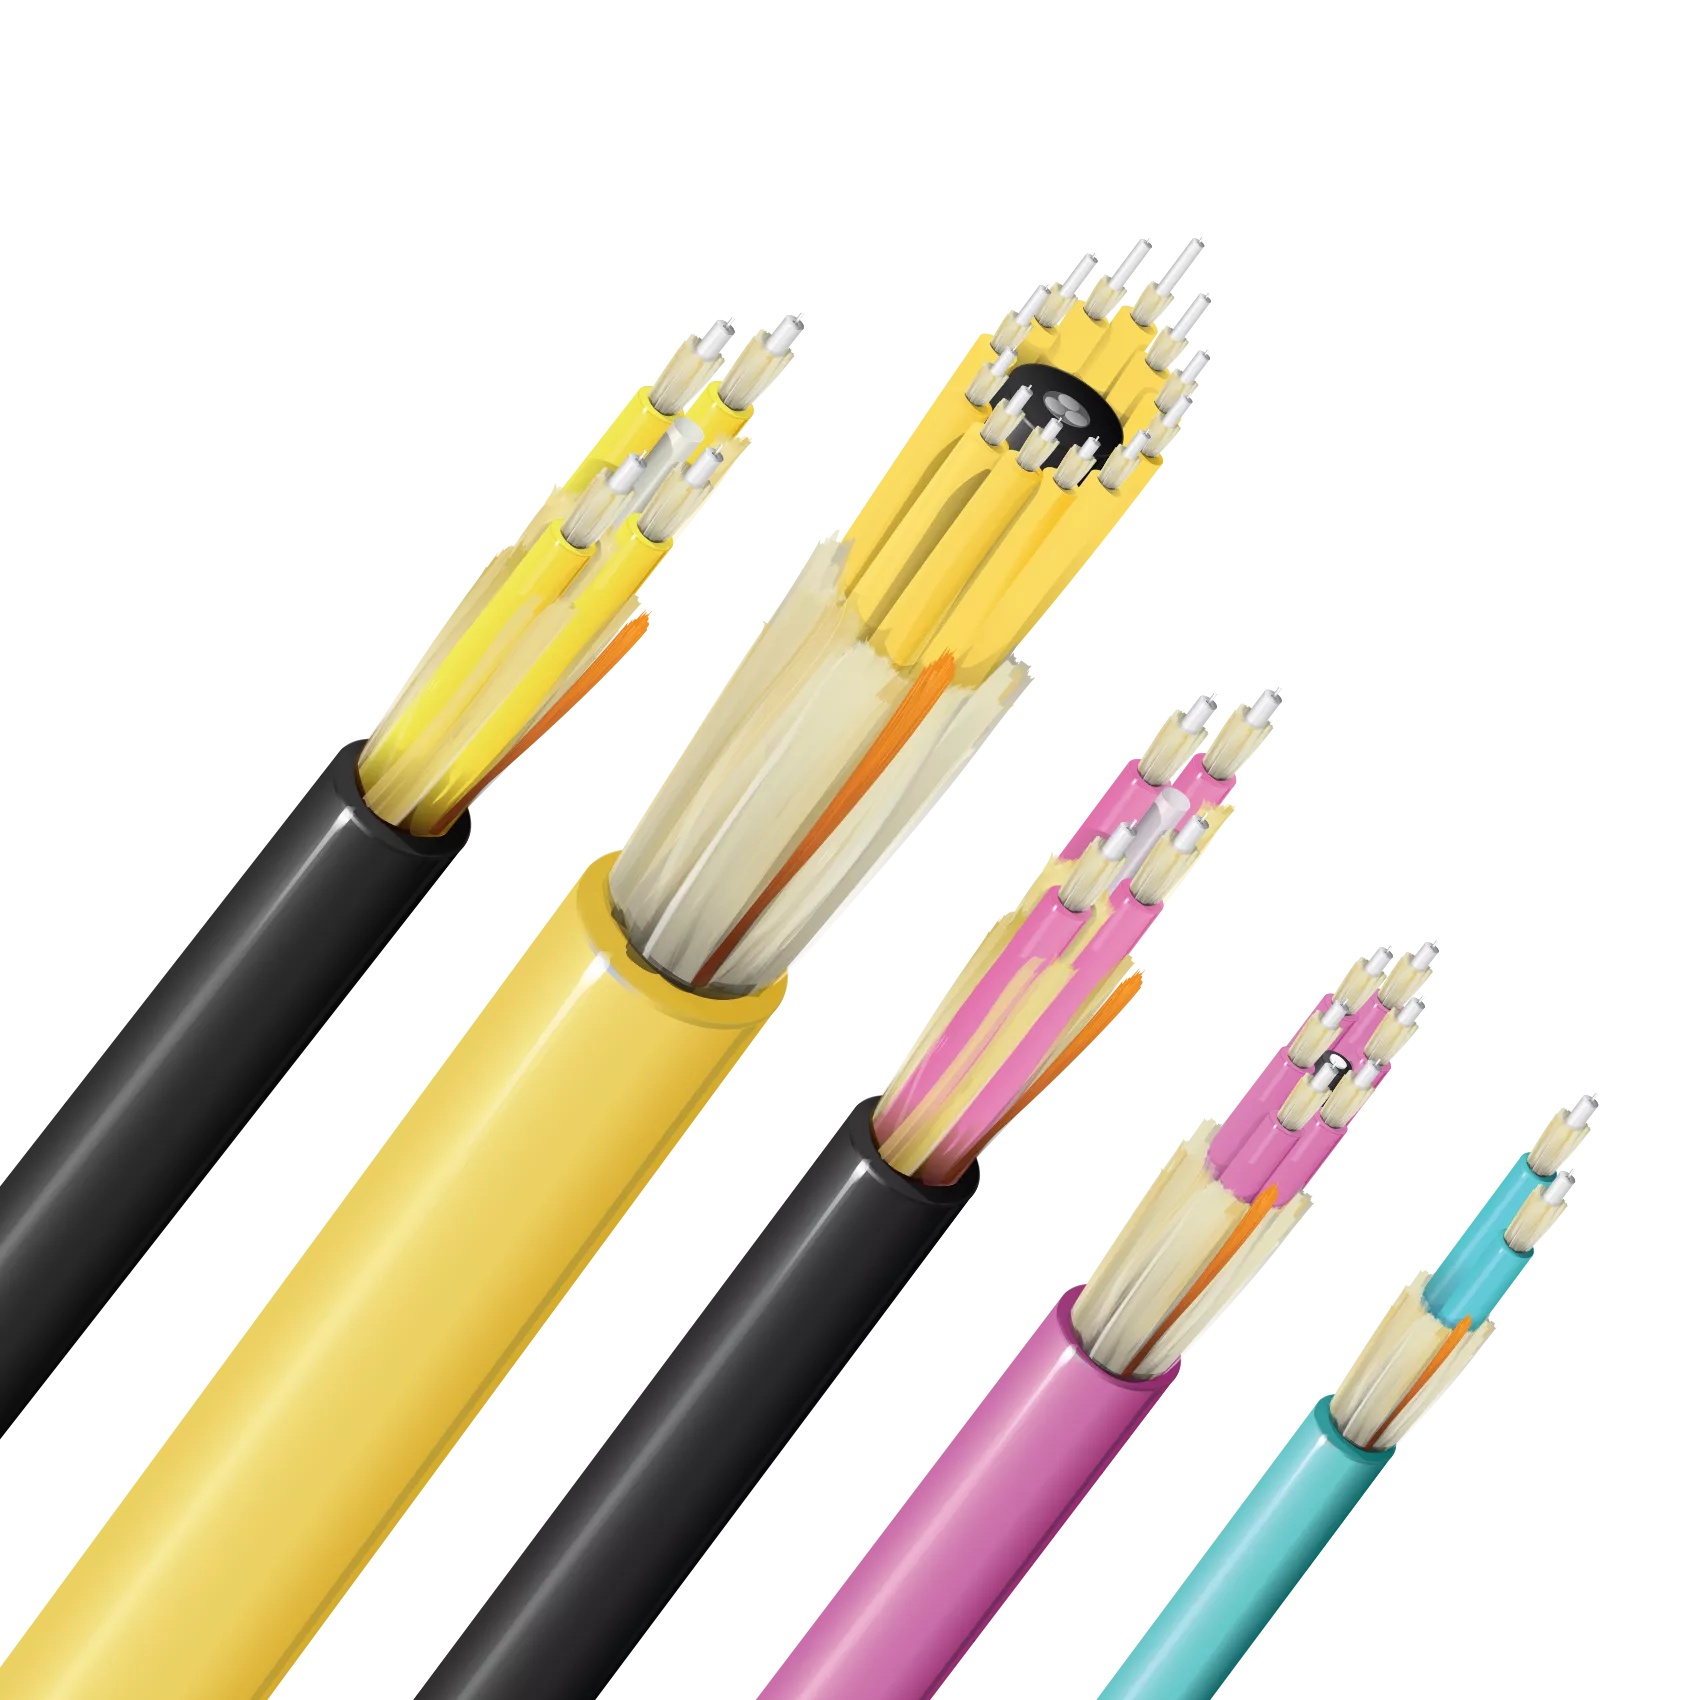 What Is Fiber Optic Cable?